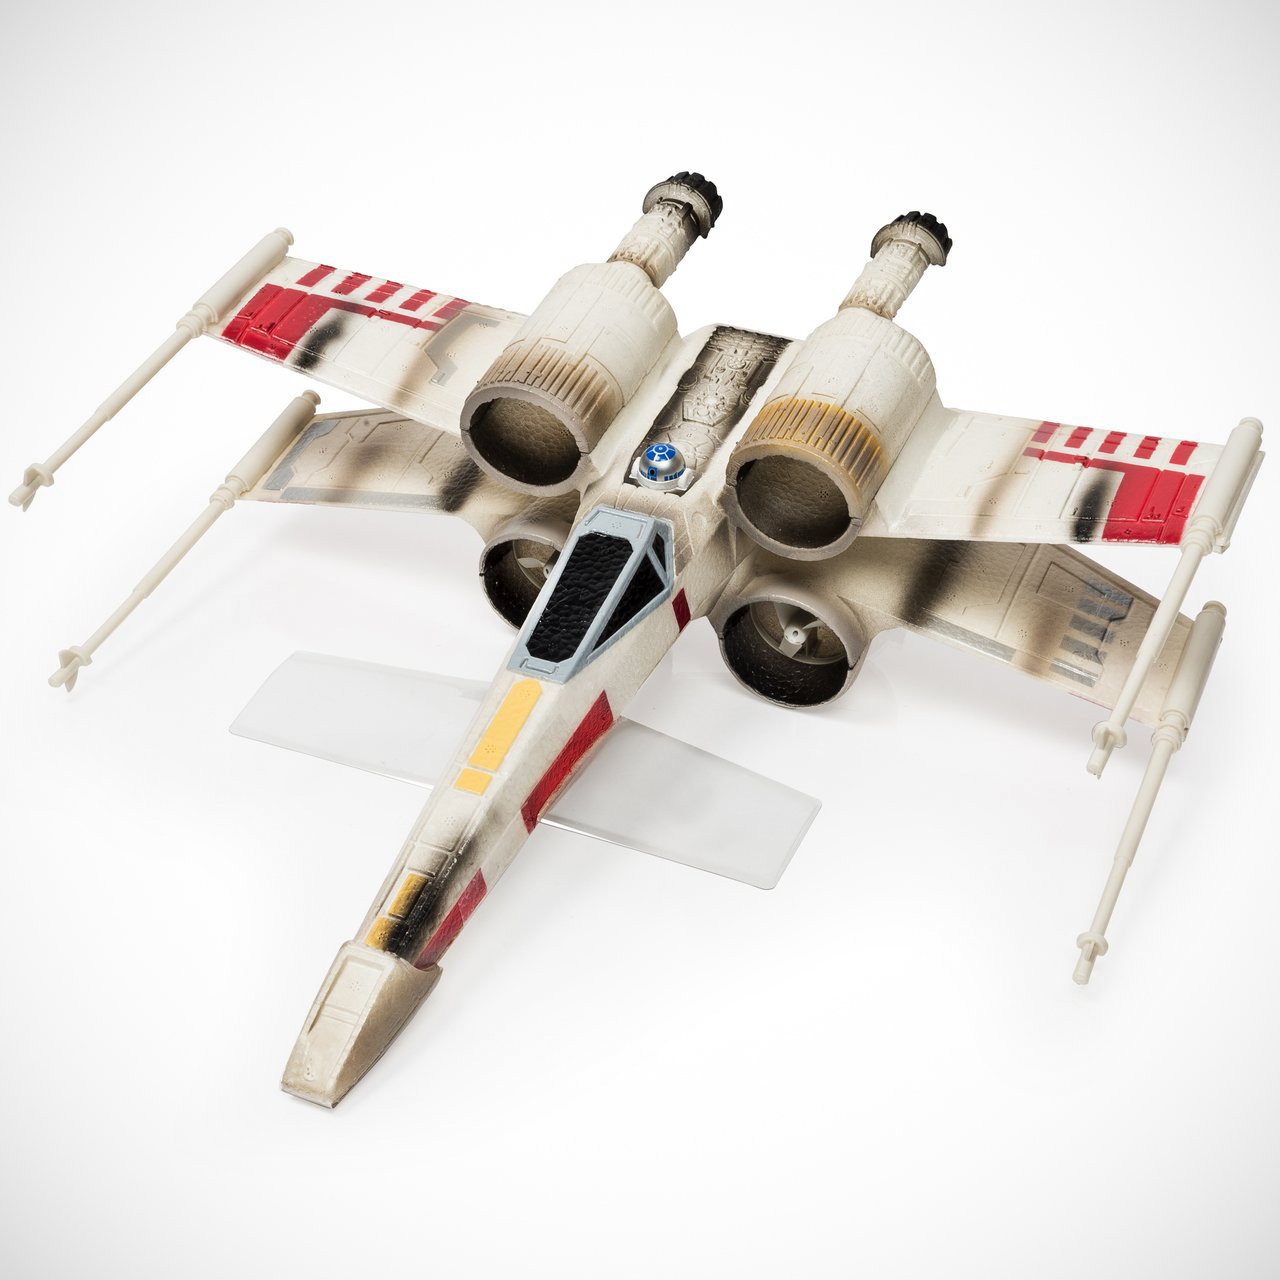 Air Hogs Star Wars X-Wing Fighter Vehicle